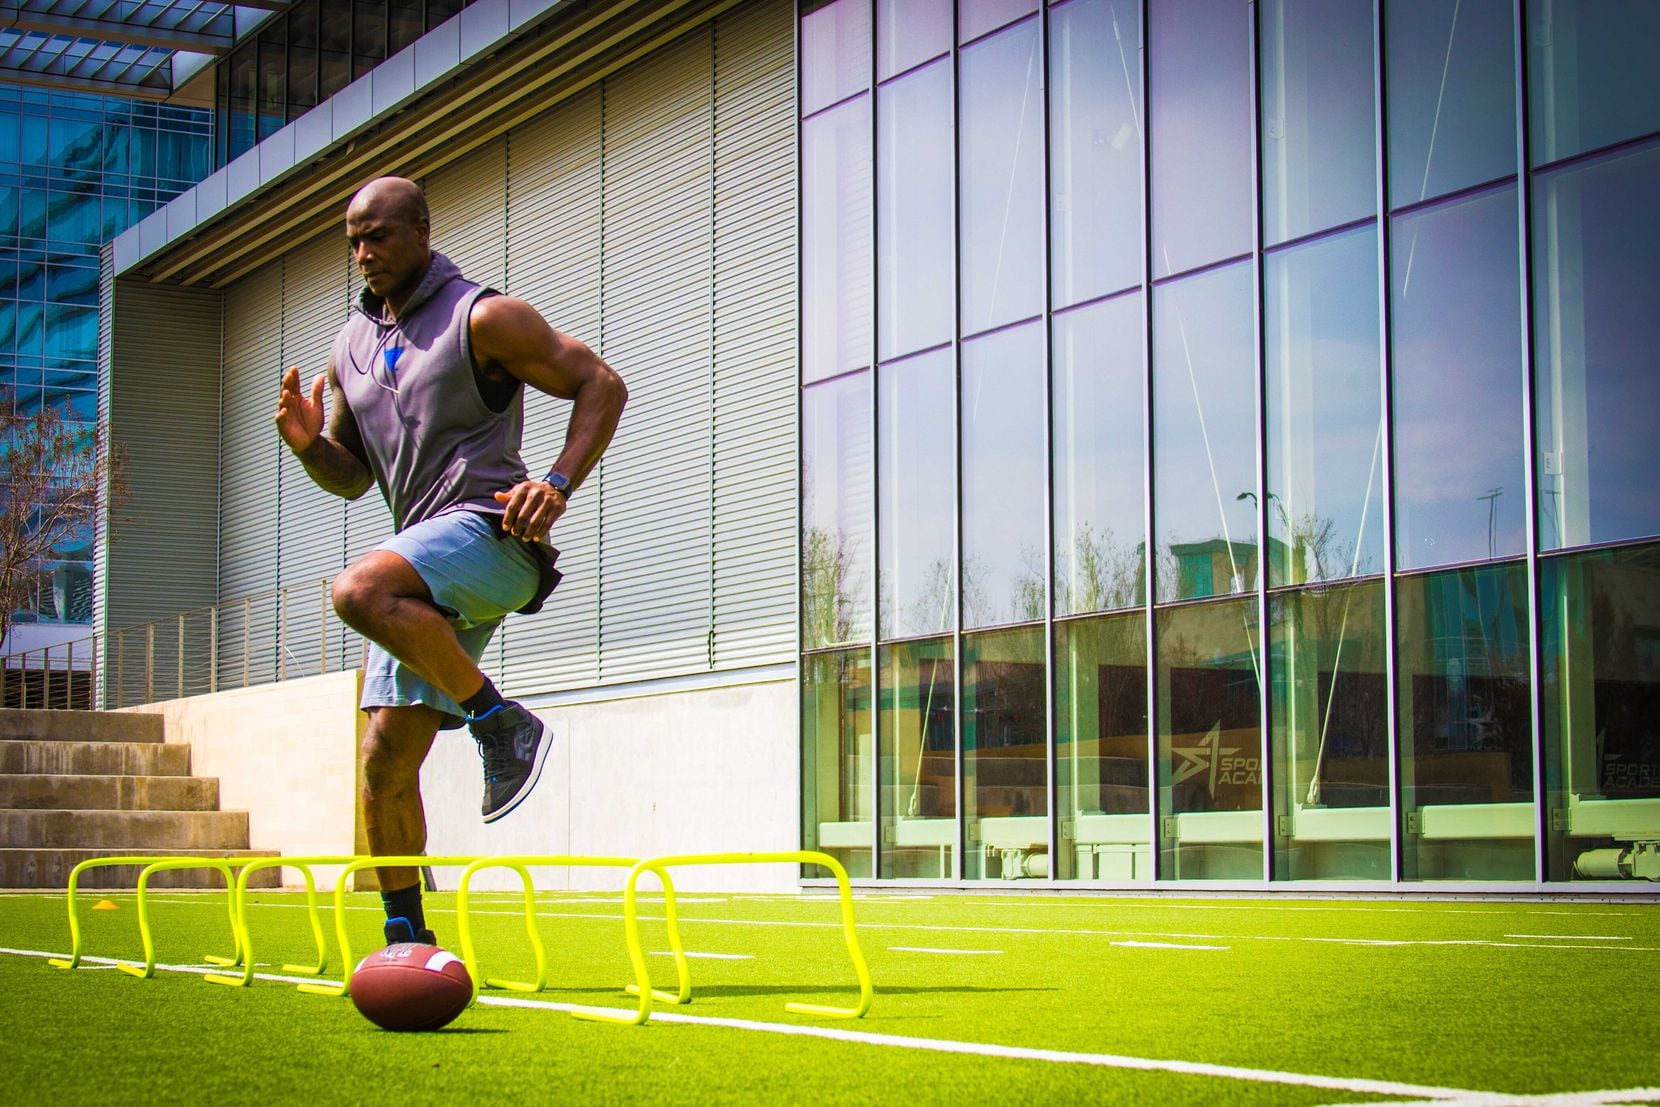 Dallas teenager Isaac Edwards captured this image of former Dallas Cowboys linebacker DeMarcus Ware training at the Star in Frisco.  Isaac received a surprise visit from Ware after winning a photo contest and attending a photo training camp.